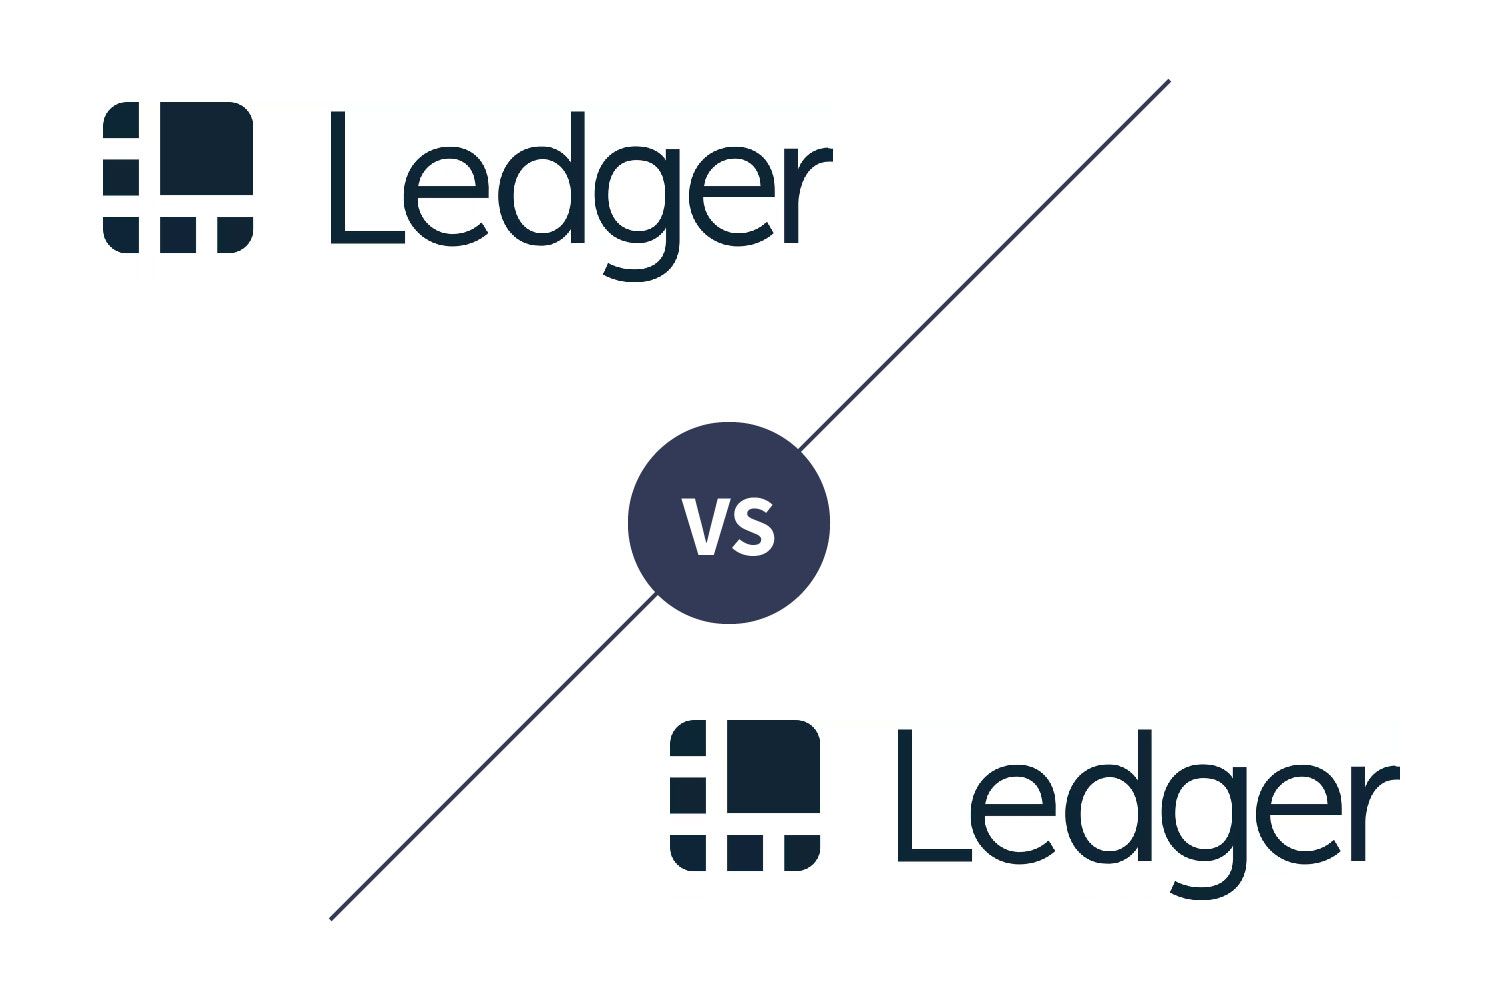 How to switch from Ledger Nano S to the Ledger Nano X? - cryptolove.fun